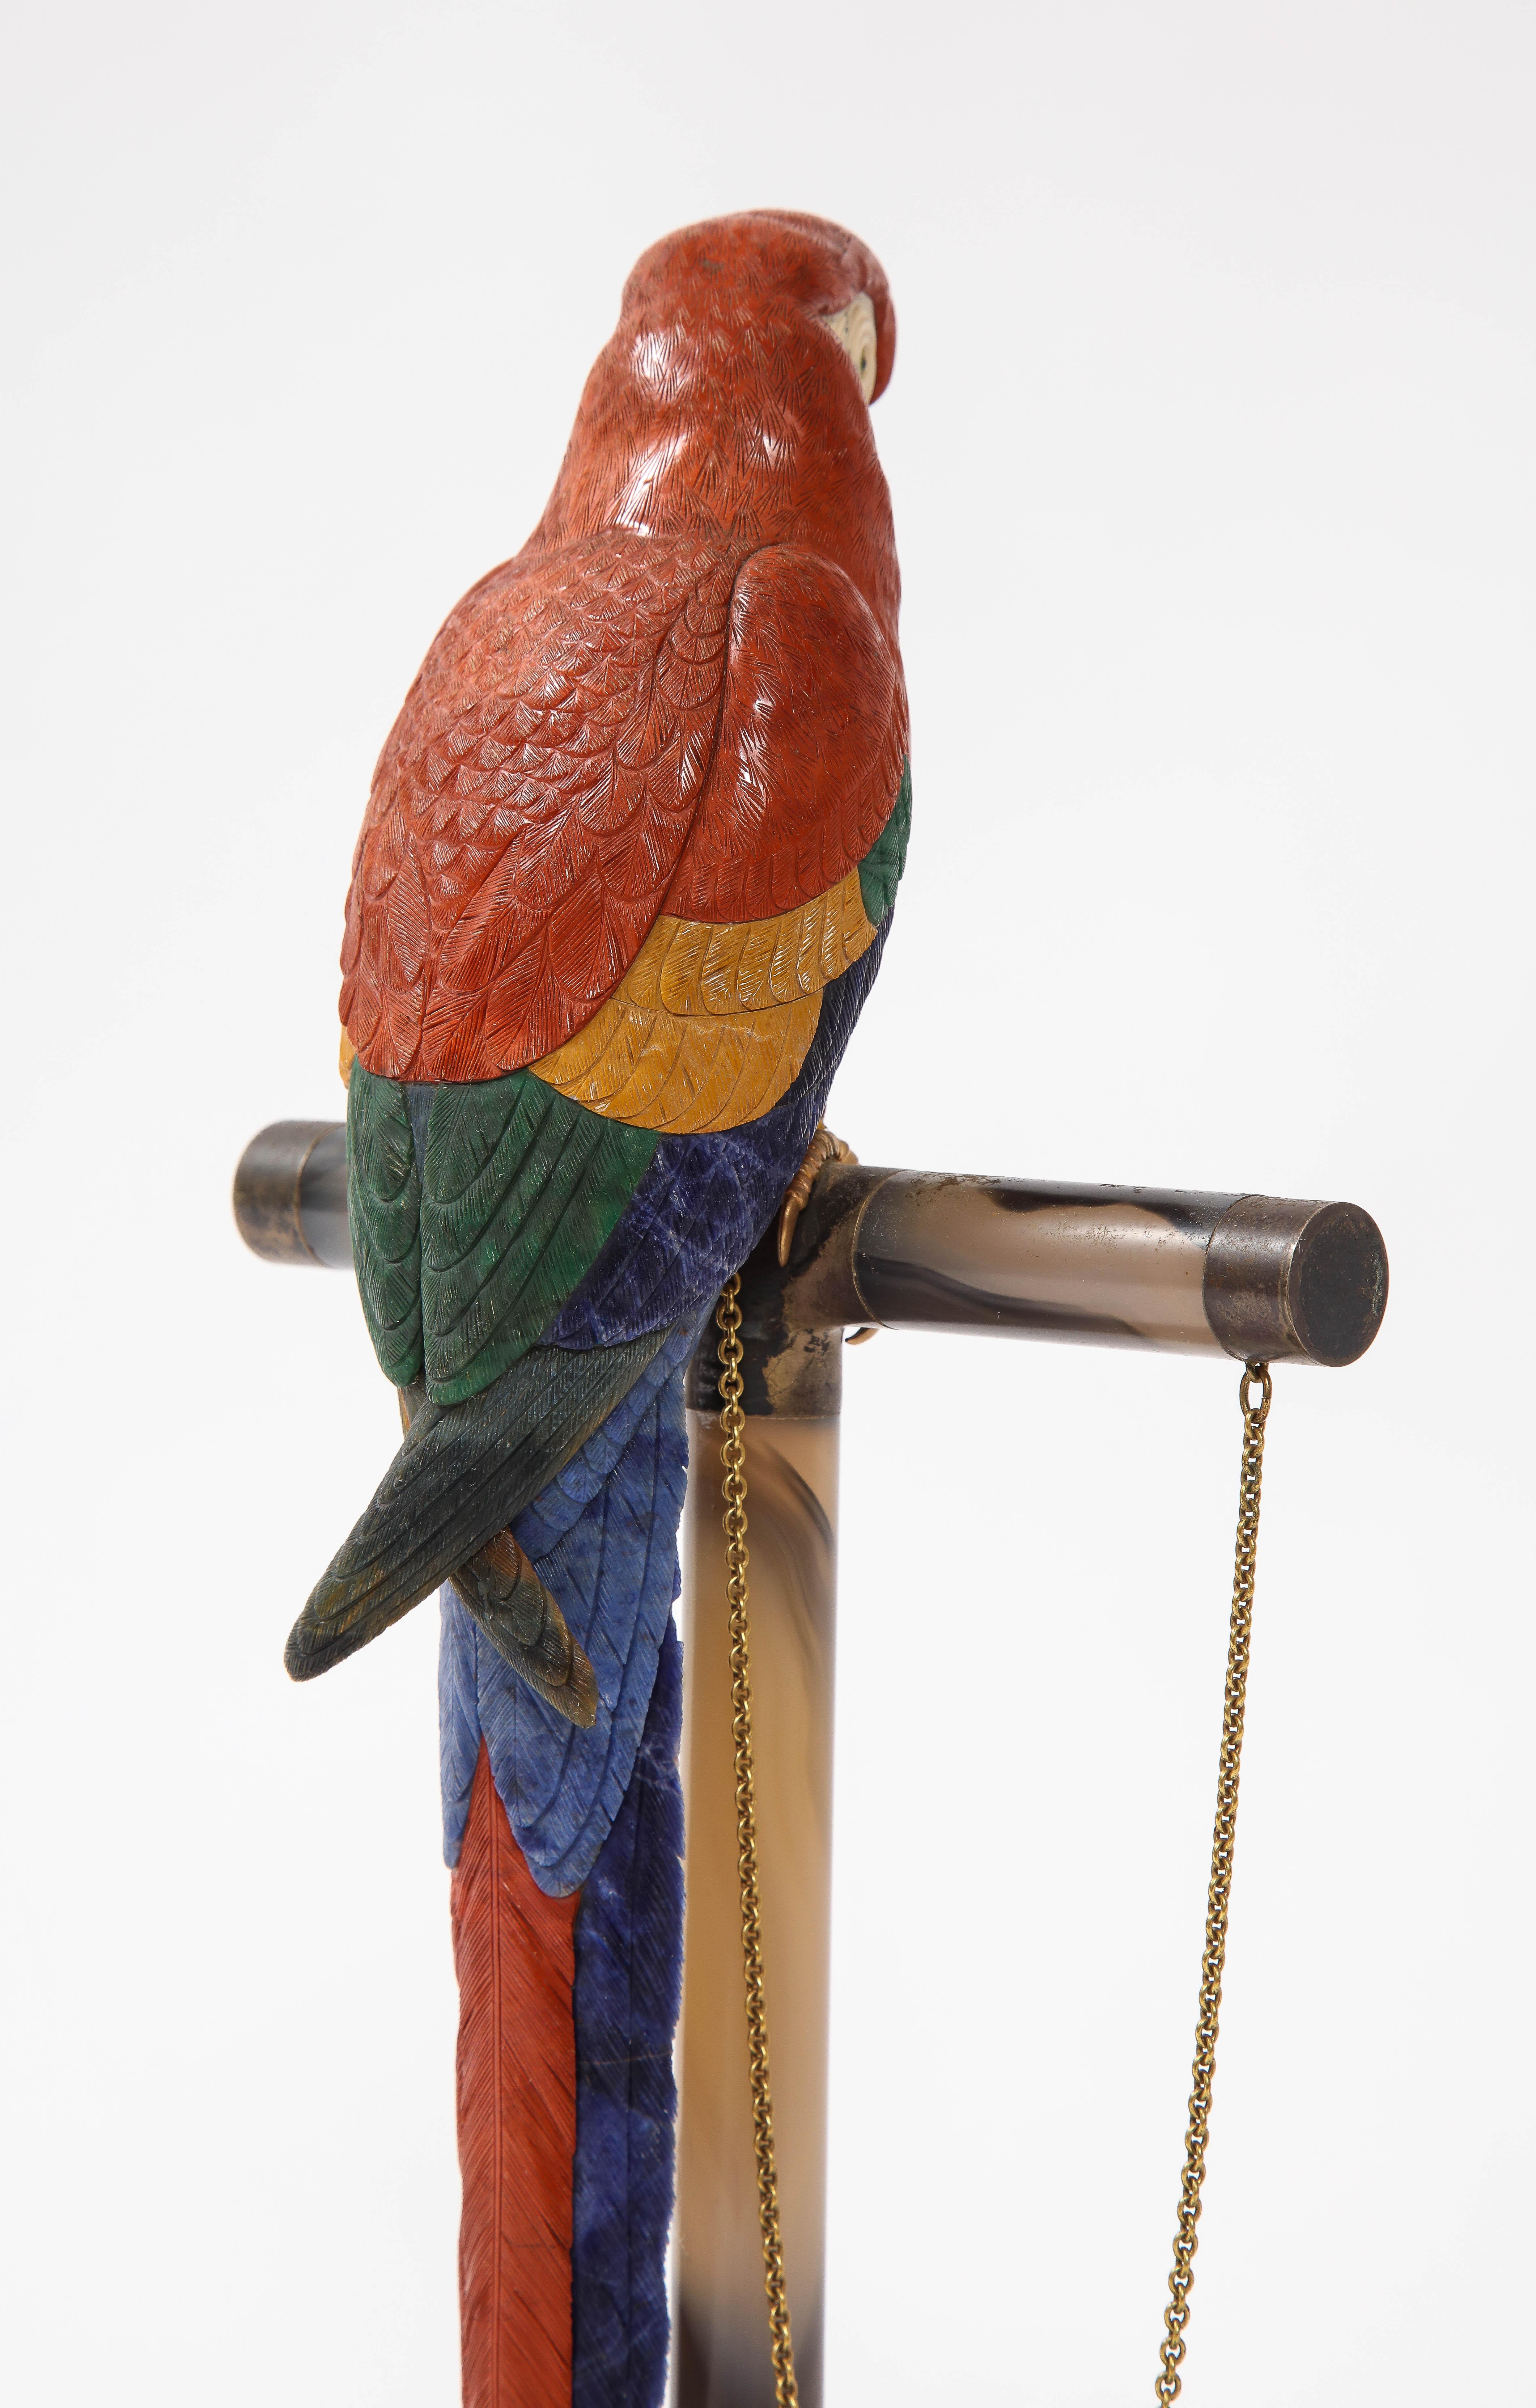 Semi Precious Stone & Metal Model of a Scarlet Macaw Parrot, P. Müller, Swiss 2